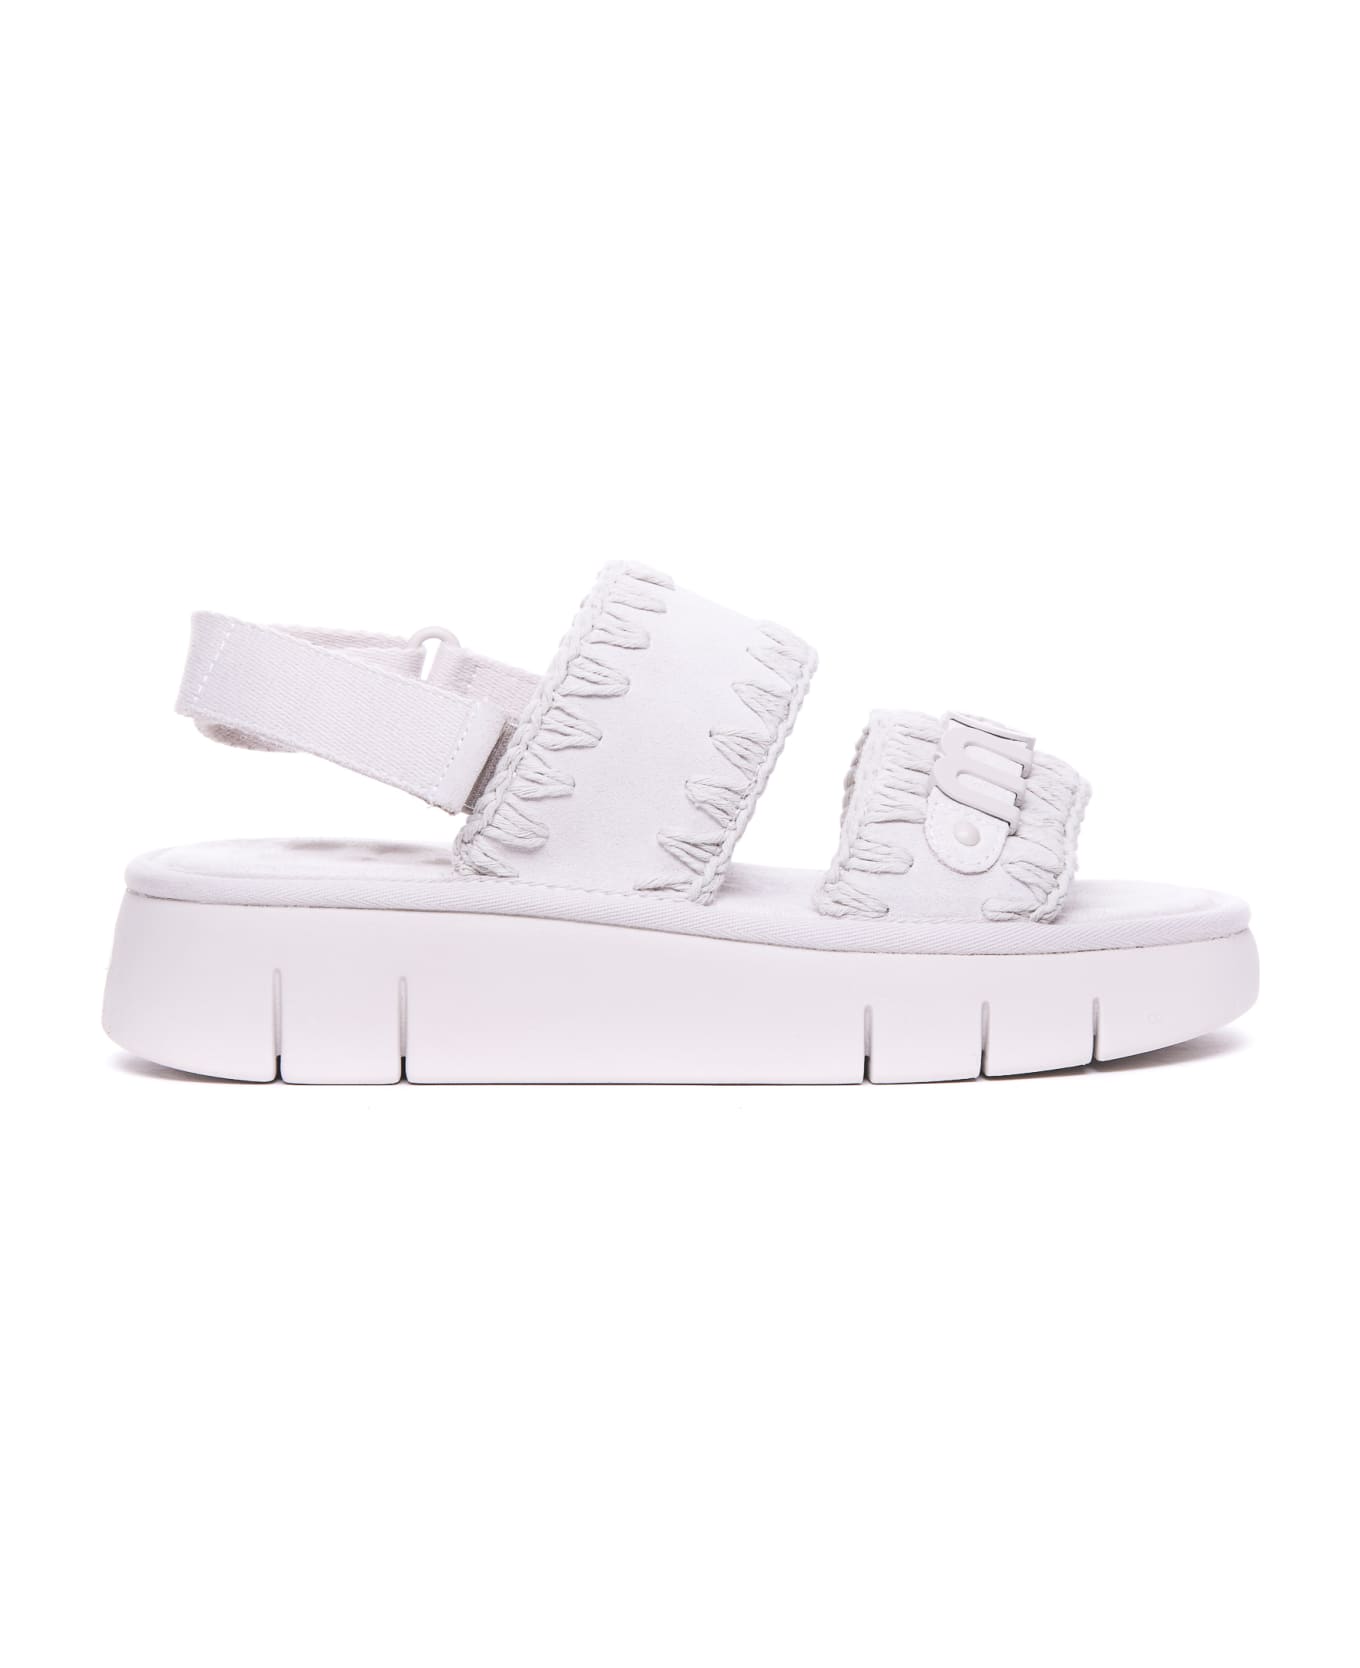 Mou Bounce Sandals - White